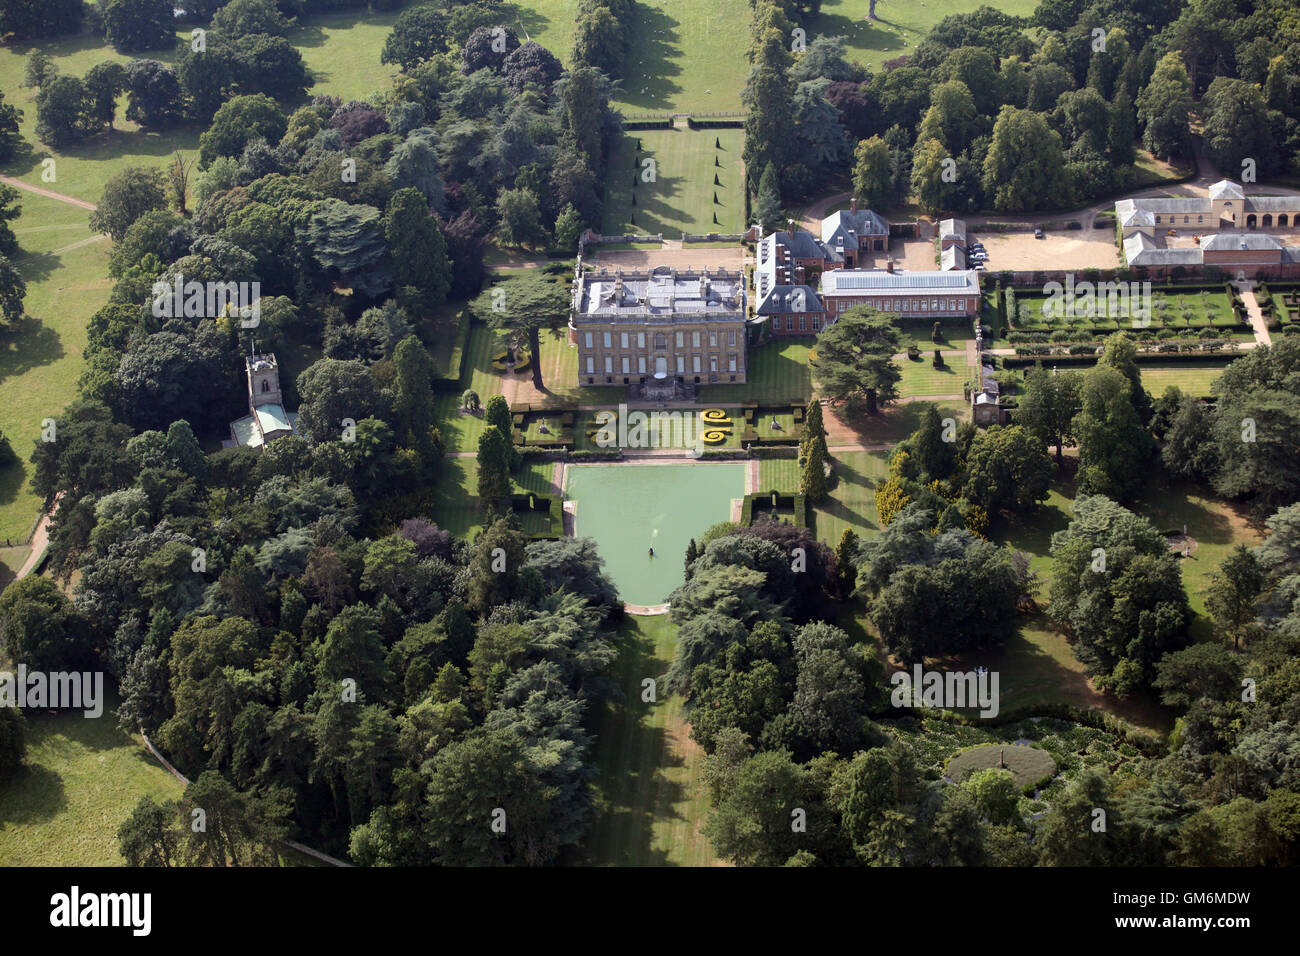 aerial view of Easton Neston country house mansion near Towcester, Northamptonshire, UK Stock Photo